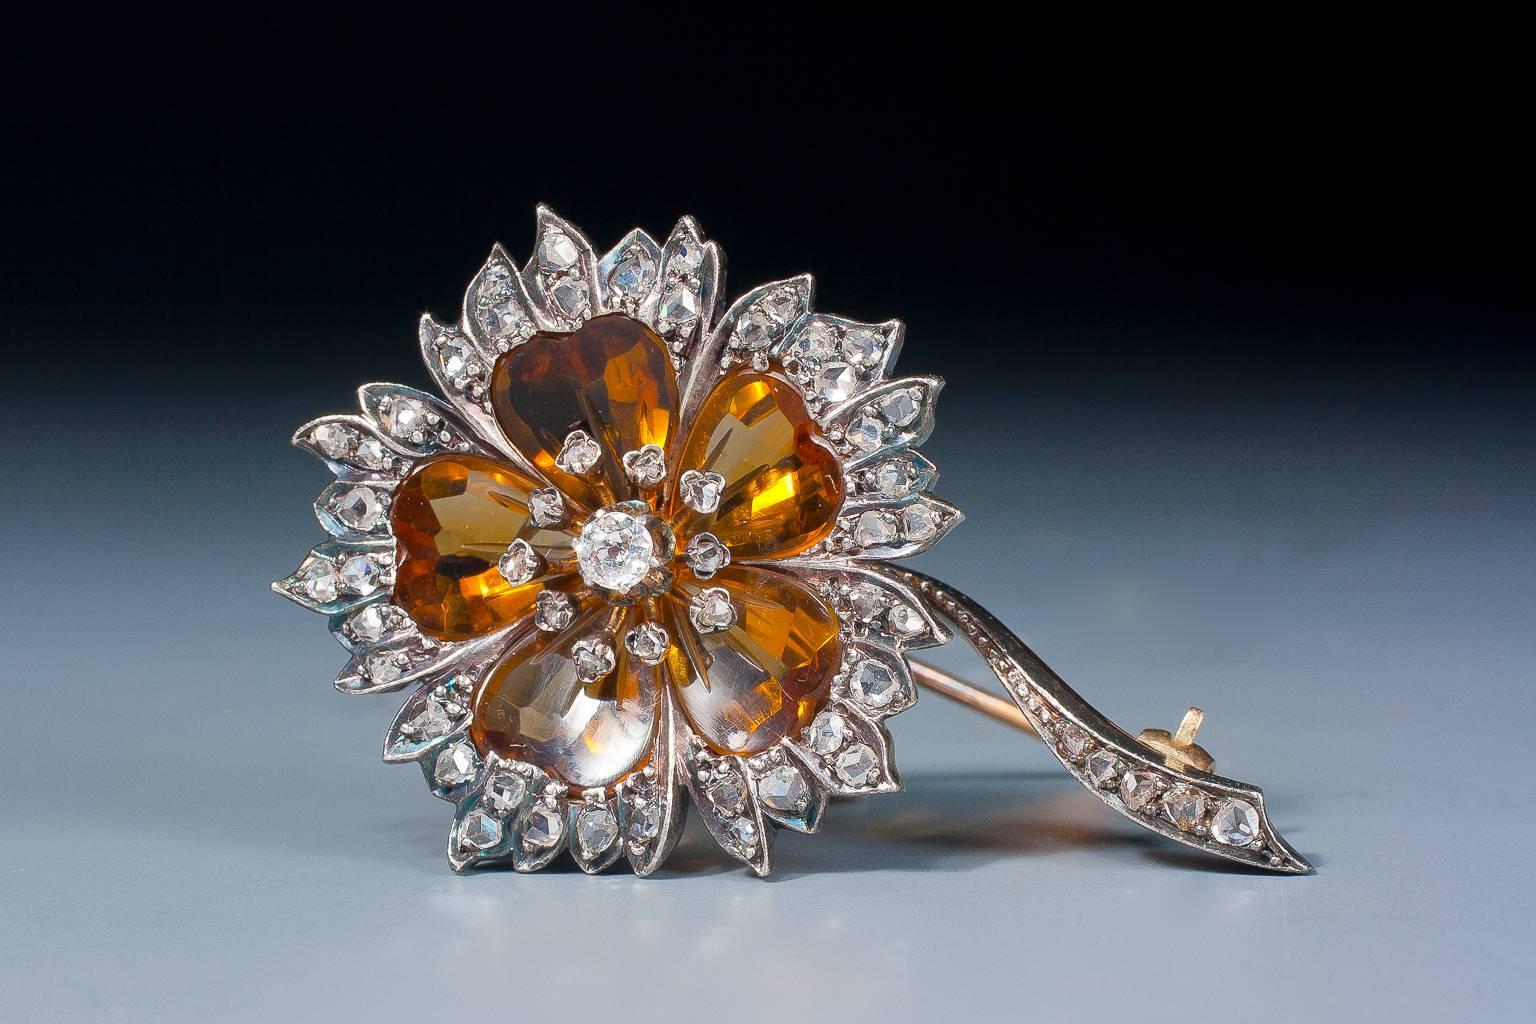 A charming Victorian citrine and diamond flower head brooch, each petal formed with a cabochon heart shaped citrine with rose cut diamond set tips, centered with a cluster of circular cut and rose cut diamonds, mounted in silver on gold.
French